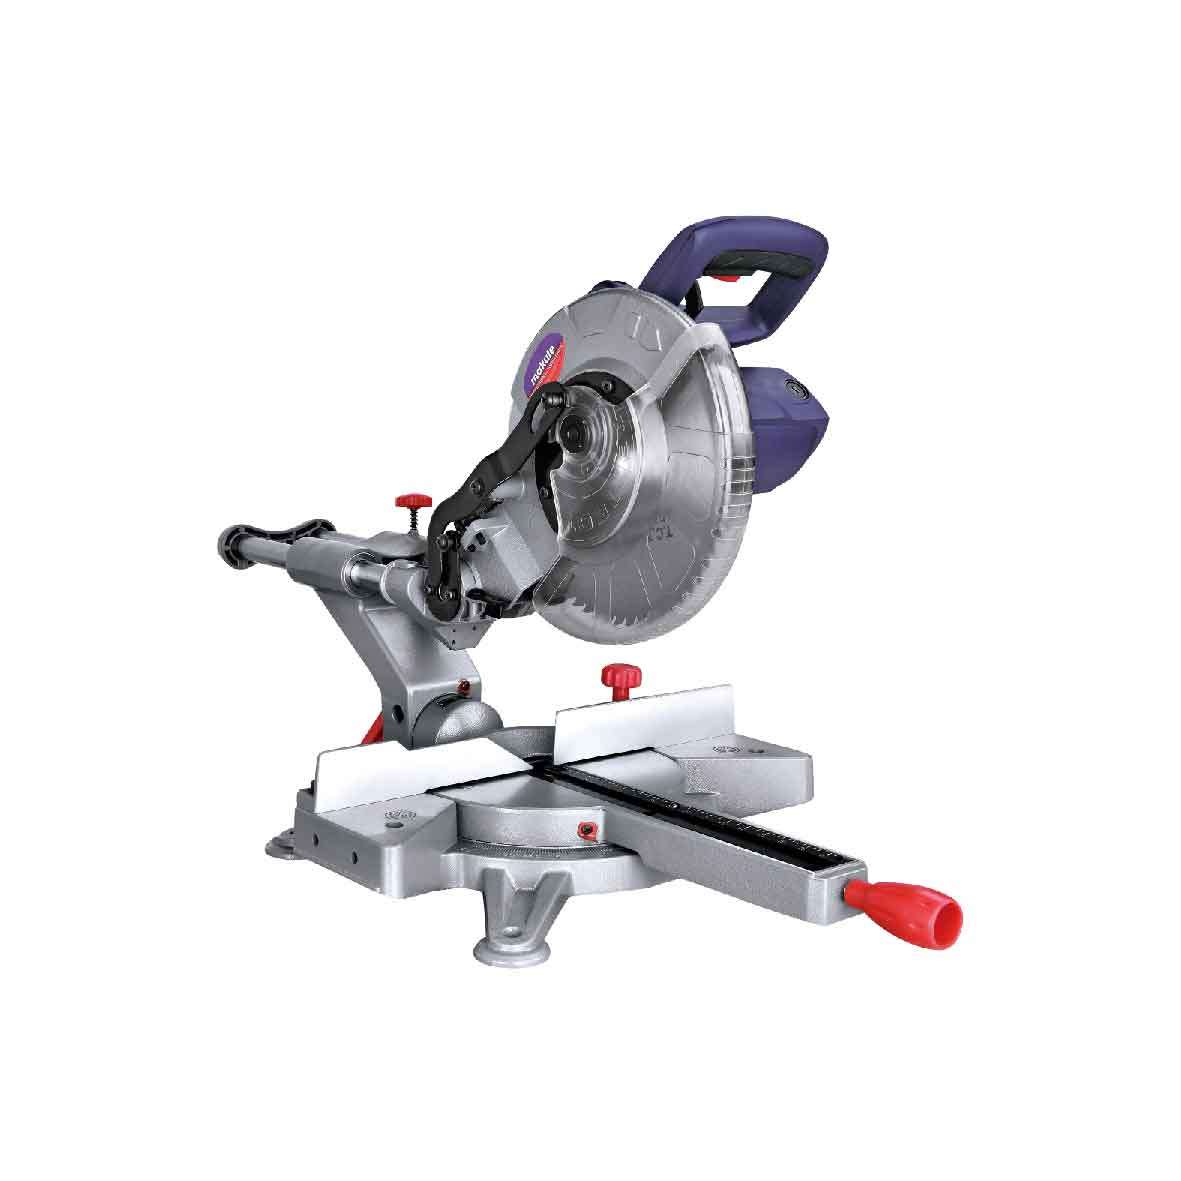 Makute Slide Compound Miter Saw for Wood Cutting